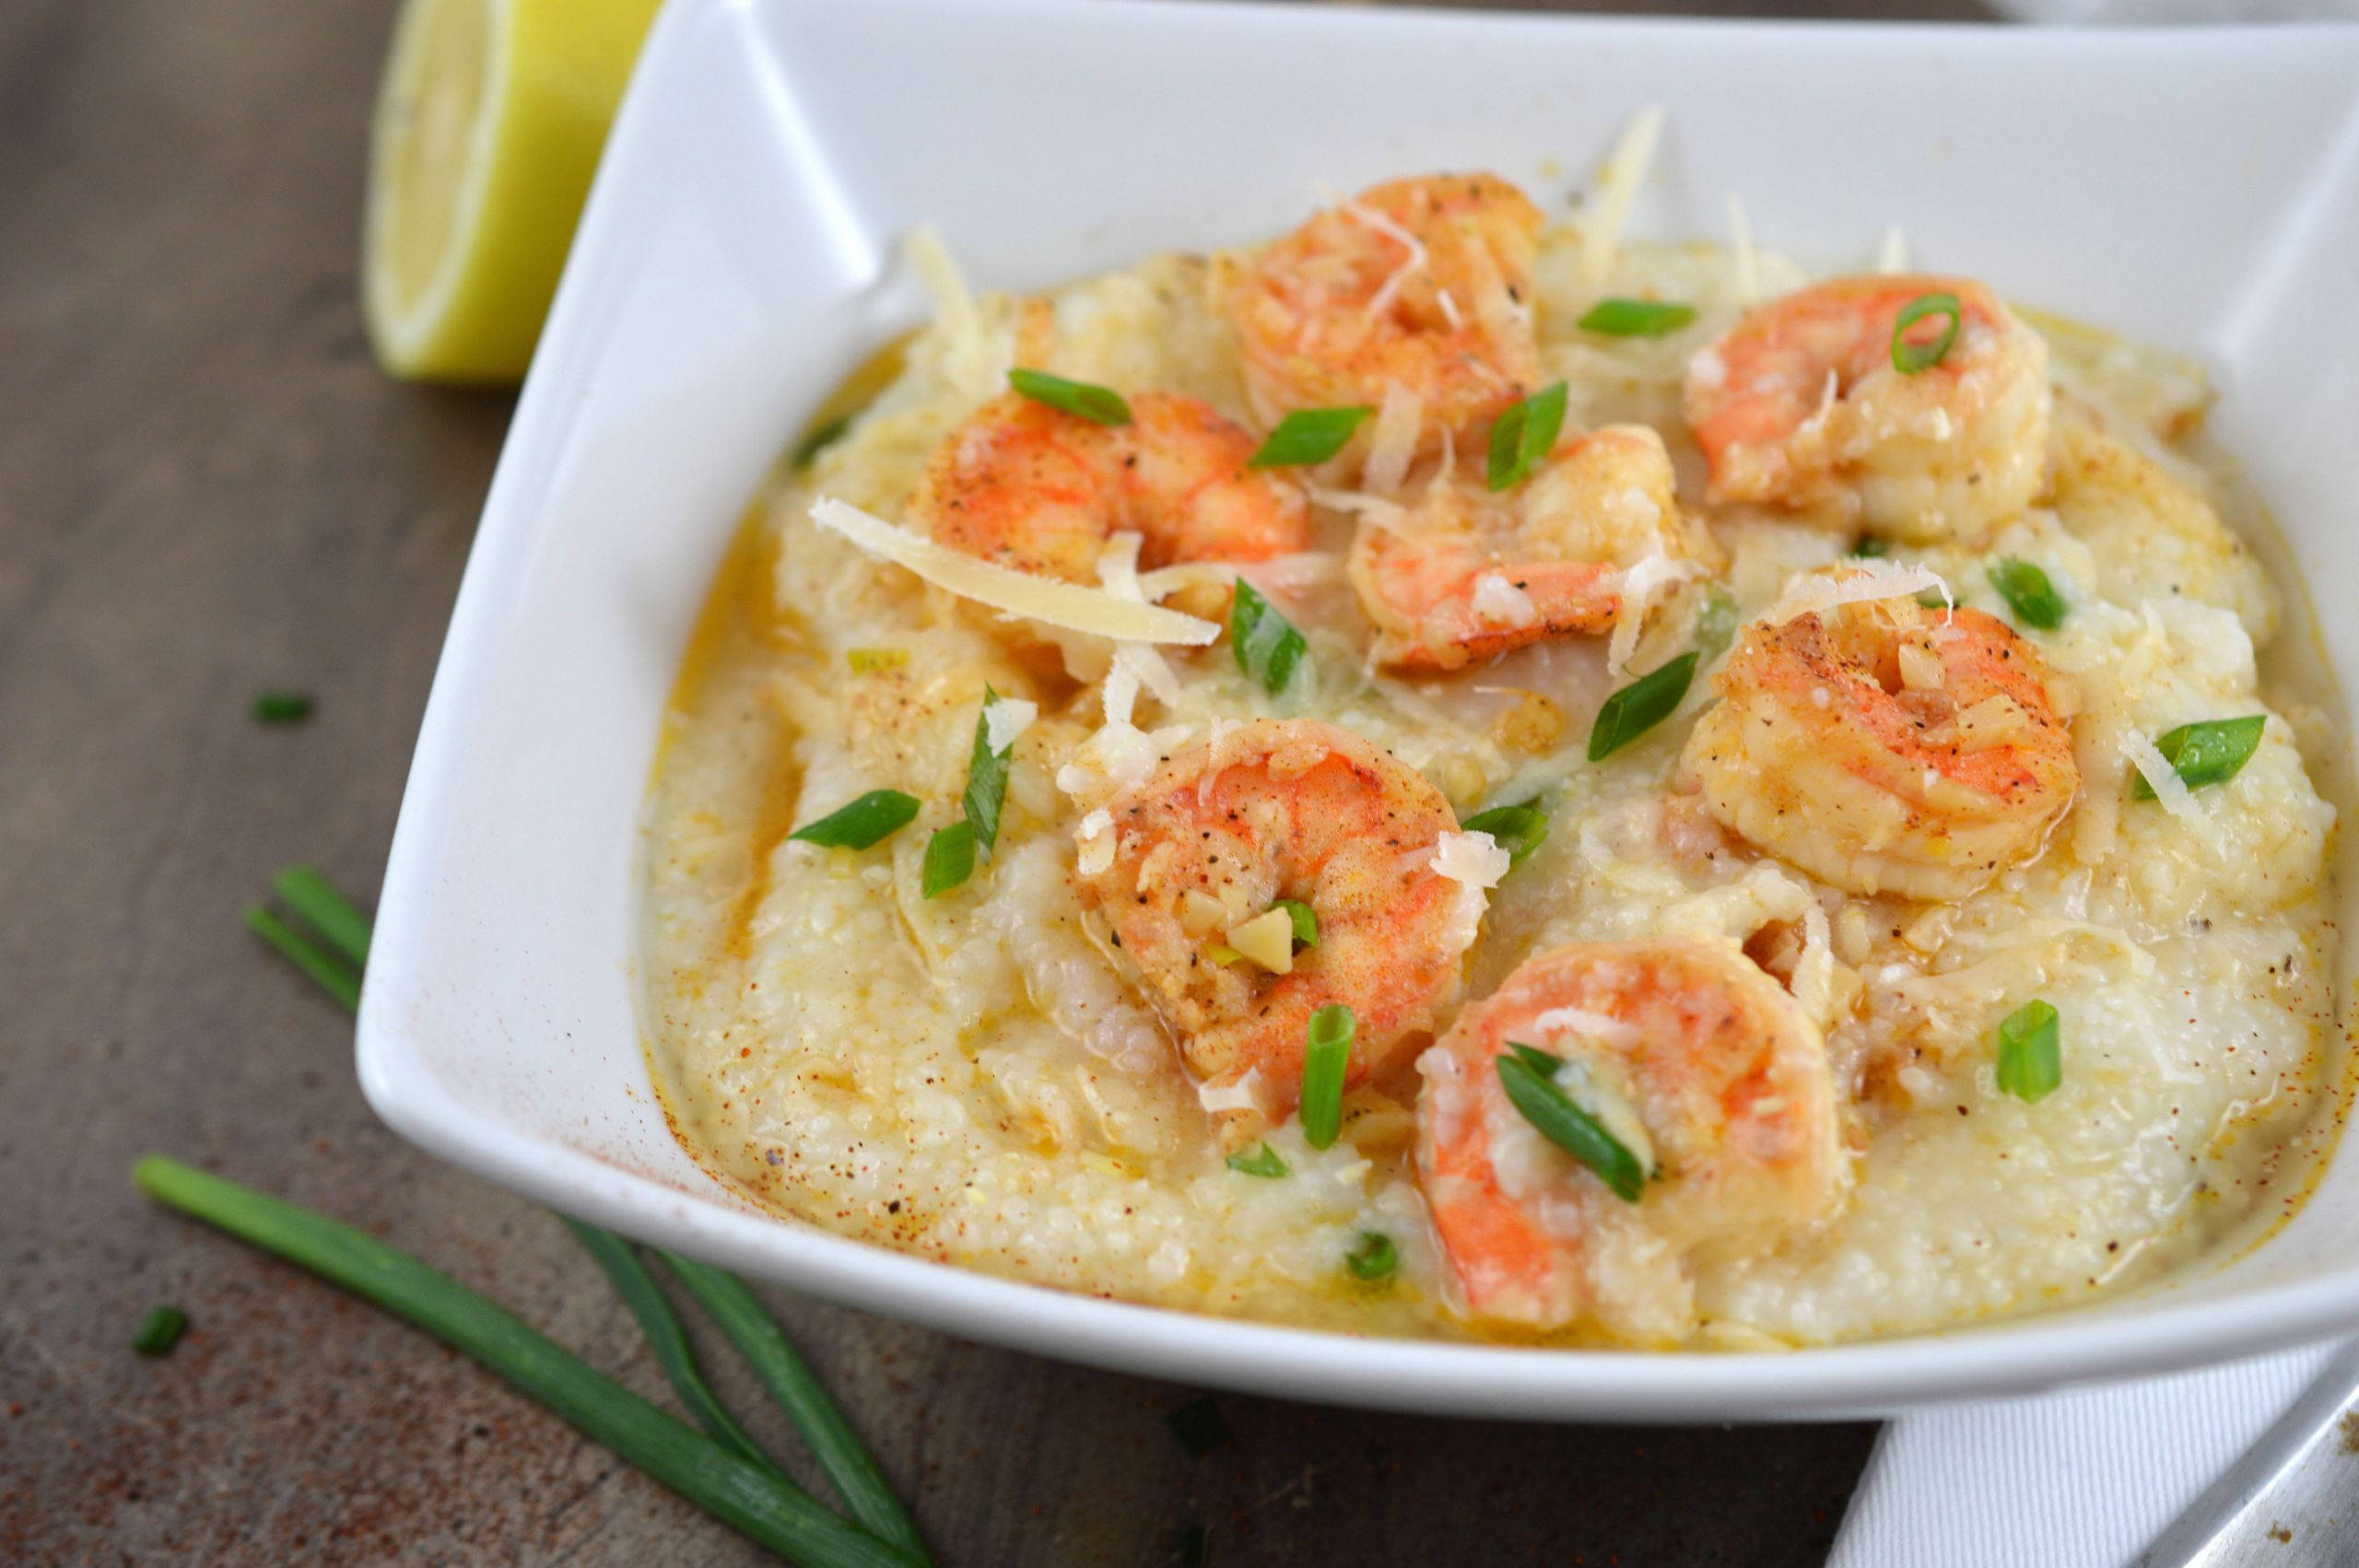 Best Shrimp and Grits Unique Tasty Tuesday S Recipe for the Week the Best Shrimp and Grits